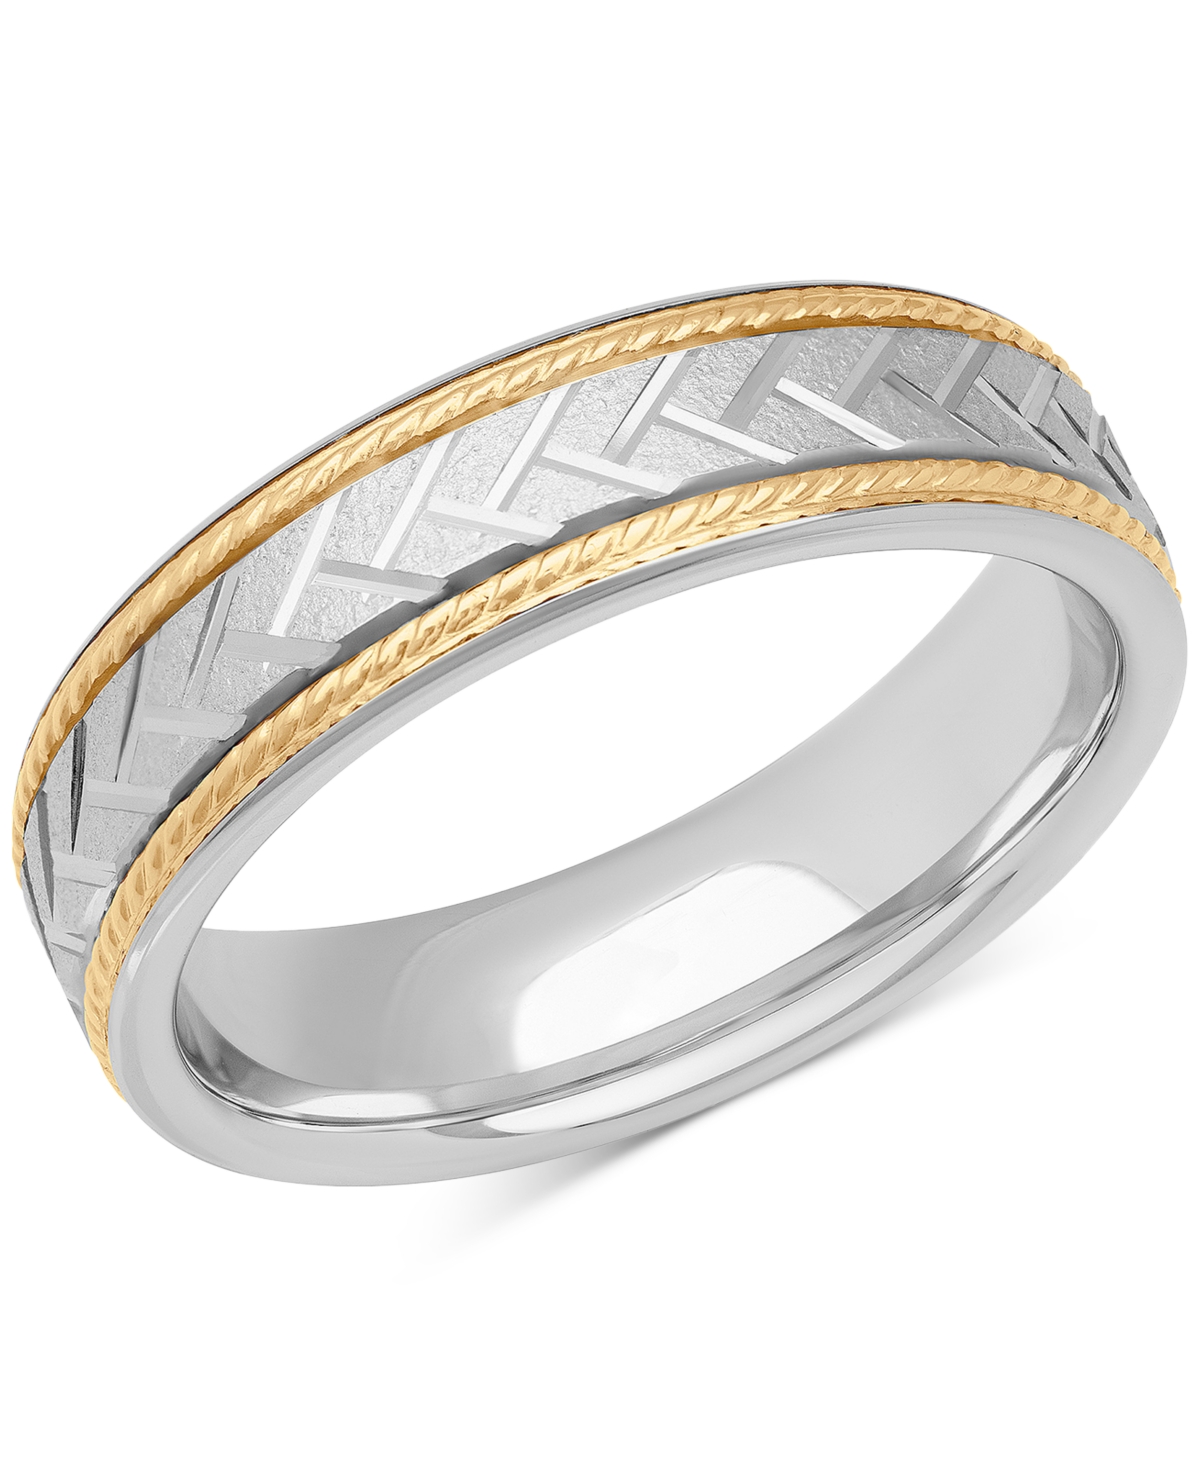 Macy's Men's Chevron Carved Two-tone Wedding Band In Sterling Silver & 18k Gold-plate